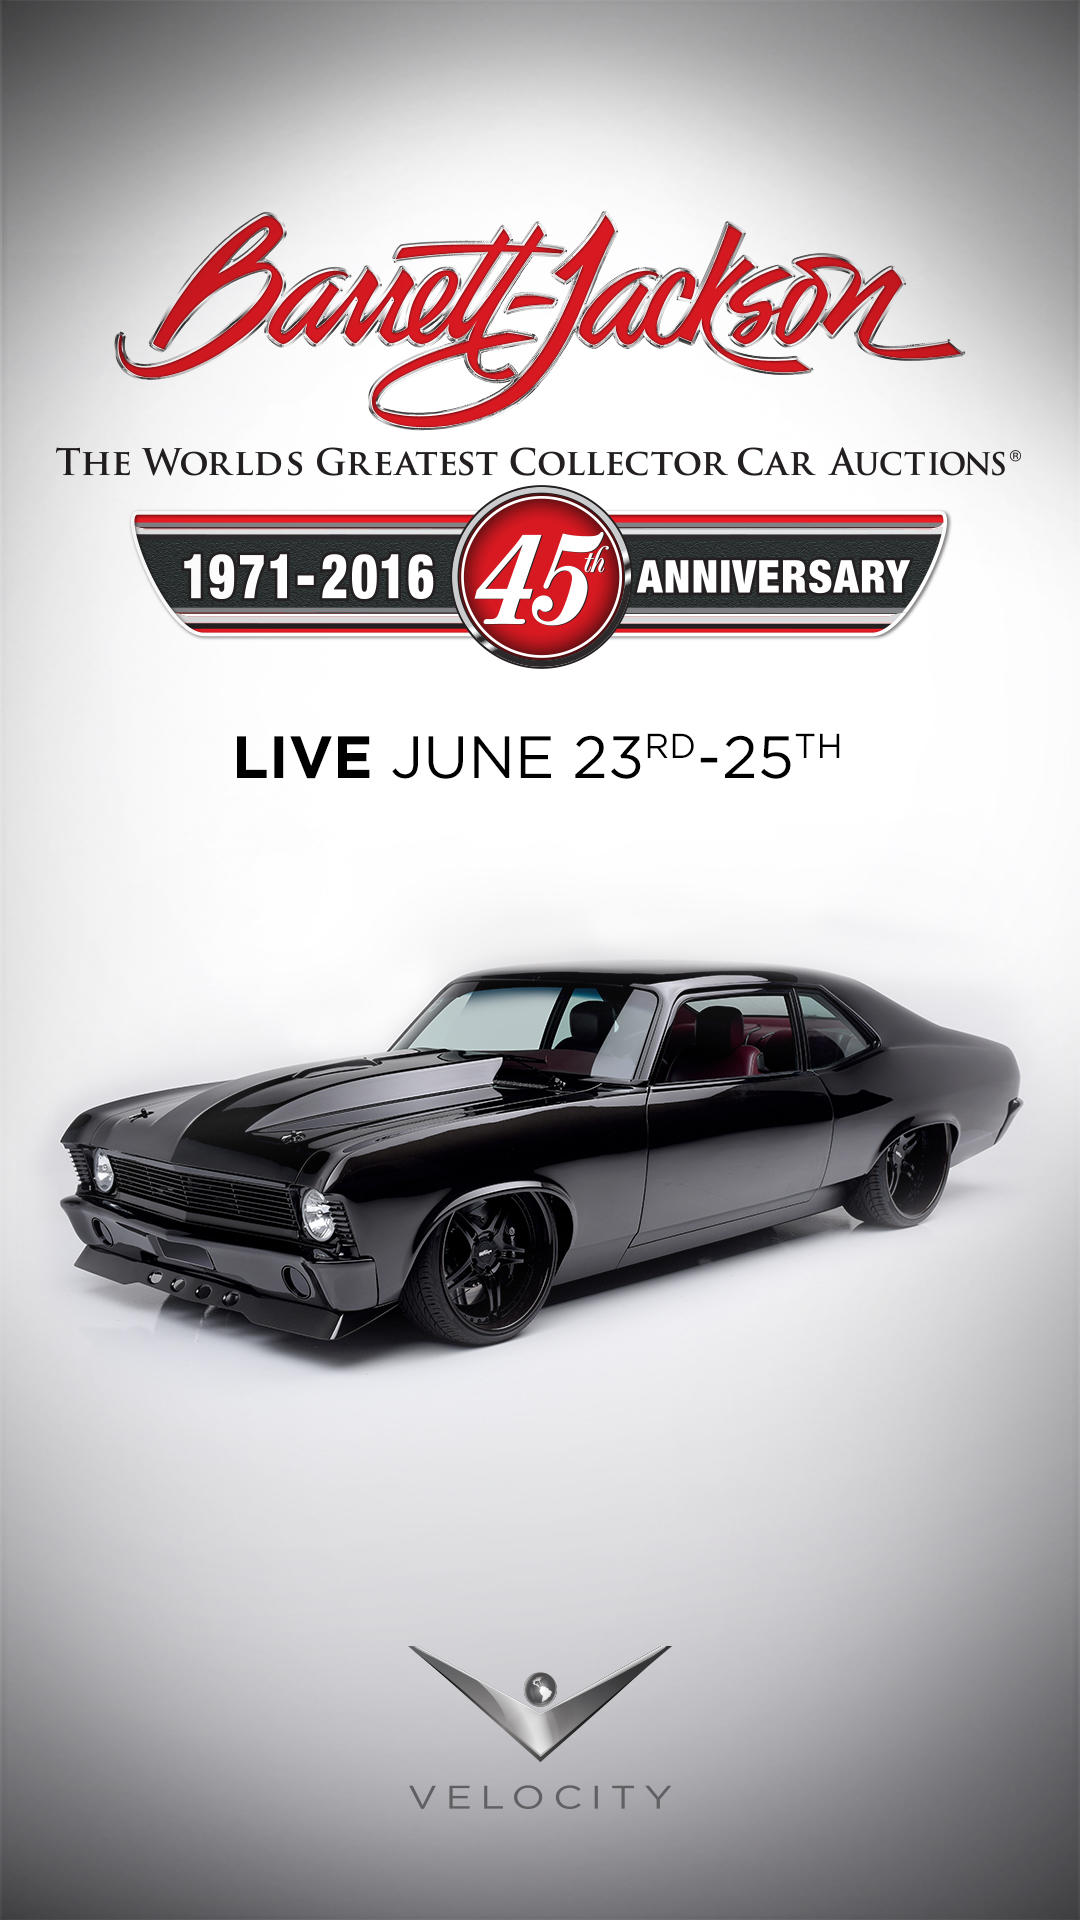 When is the Barrett Jackson live auction?